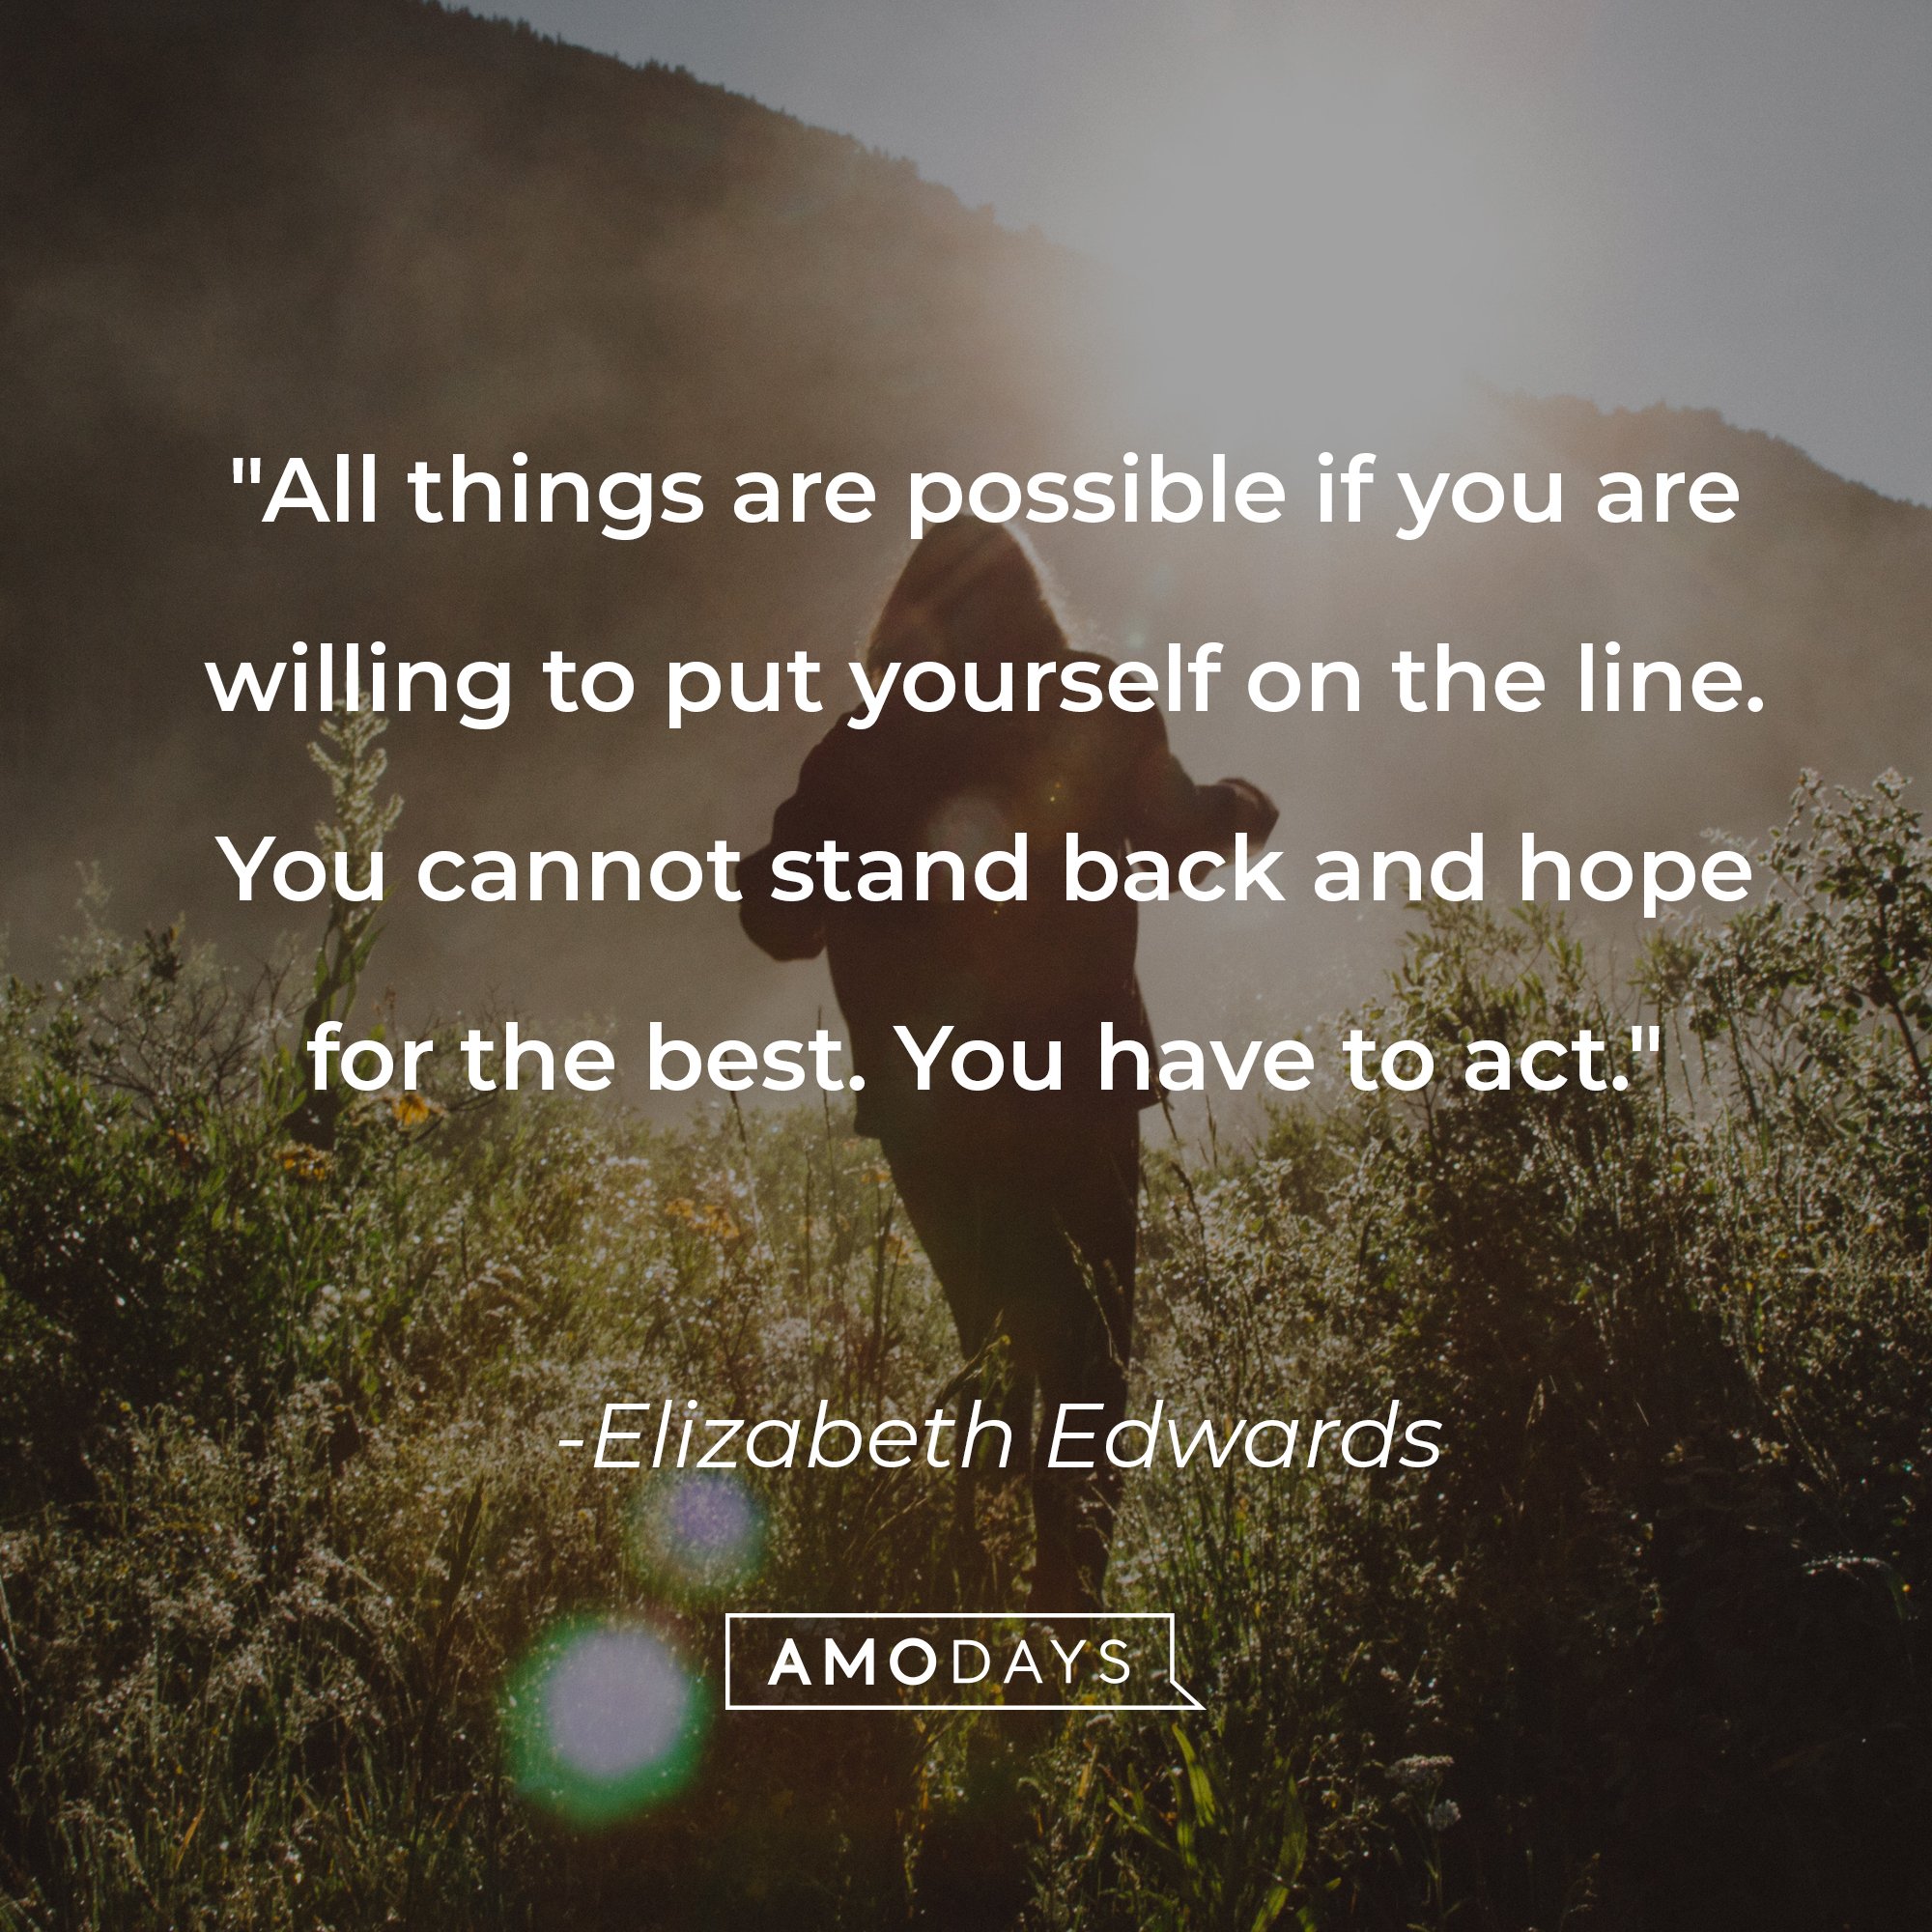 Elizabeth Edwards' quote: "All things are possible if you are willing to put yourself on the line. You cannot stand back and hope for the best. You have to act." | Image: AmoDays